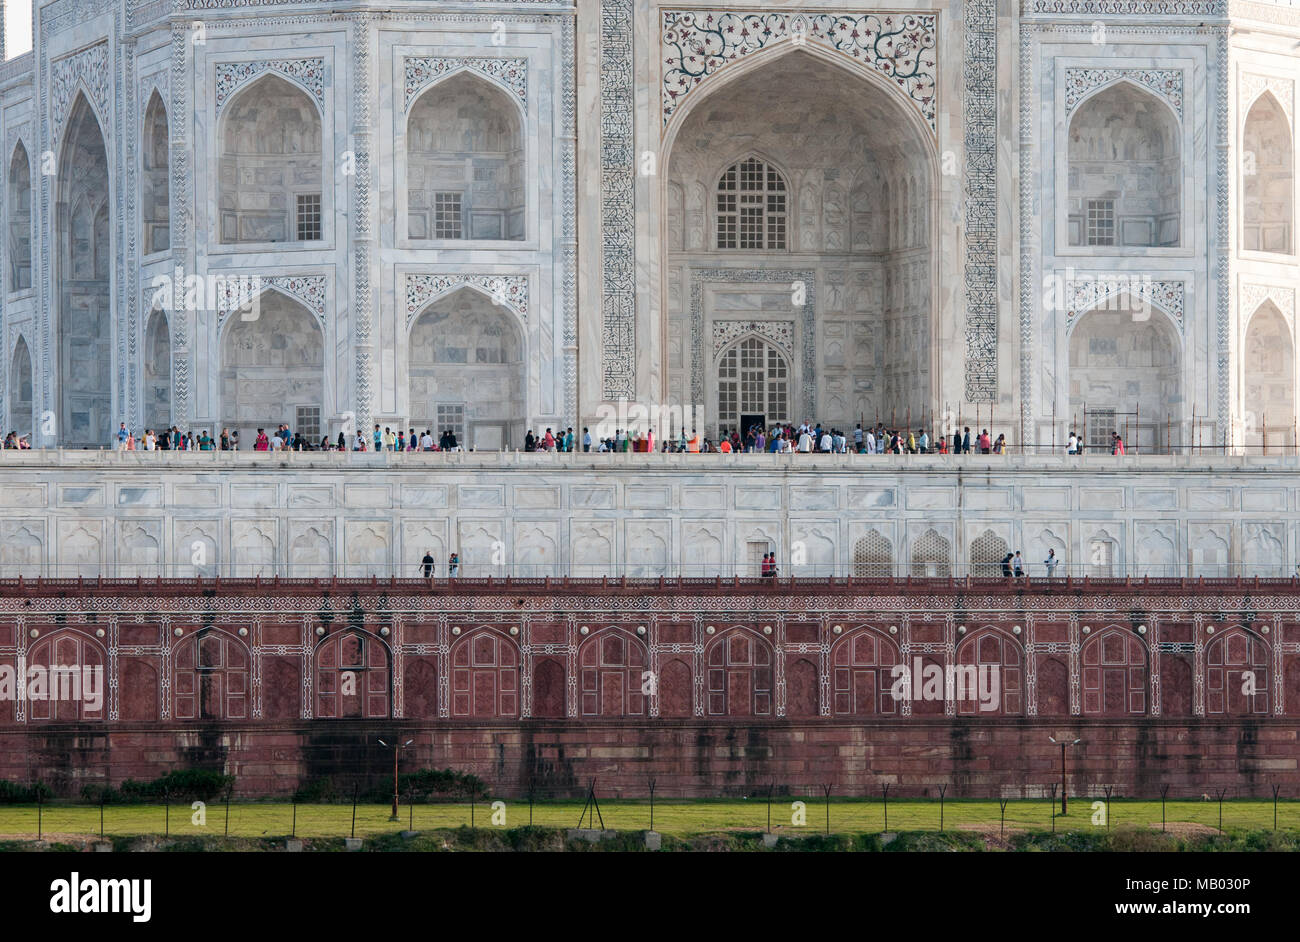 Agra, India - March 15 2017: Famous marble palace of Taj Mahal, dedicated to love, with tourists around, in Agra city, india Stock Photo